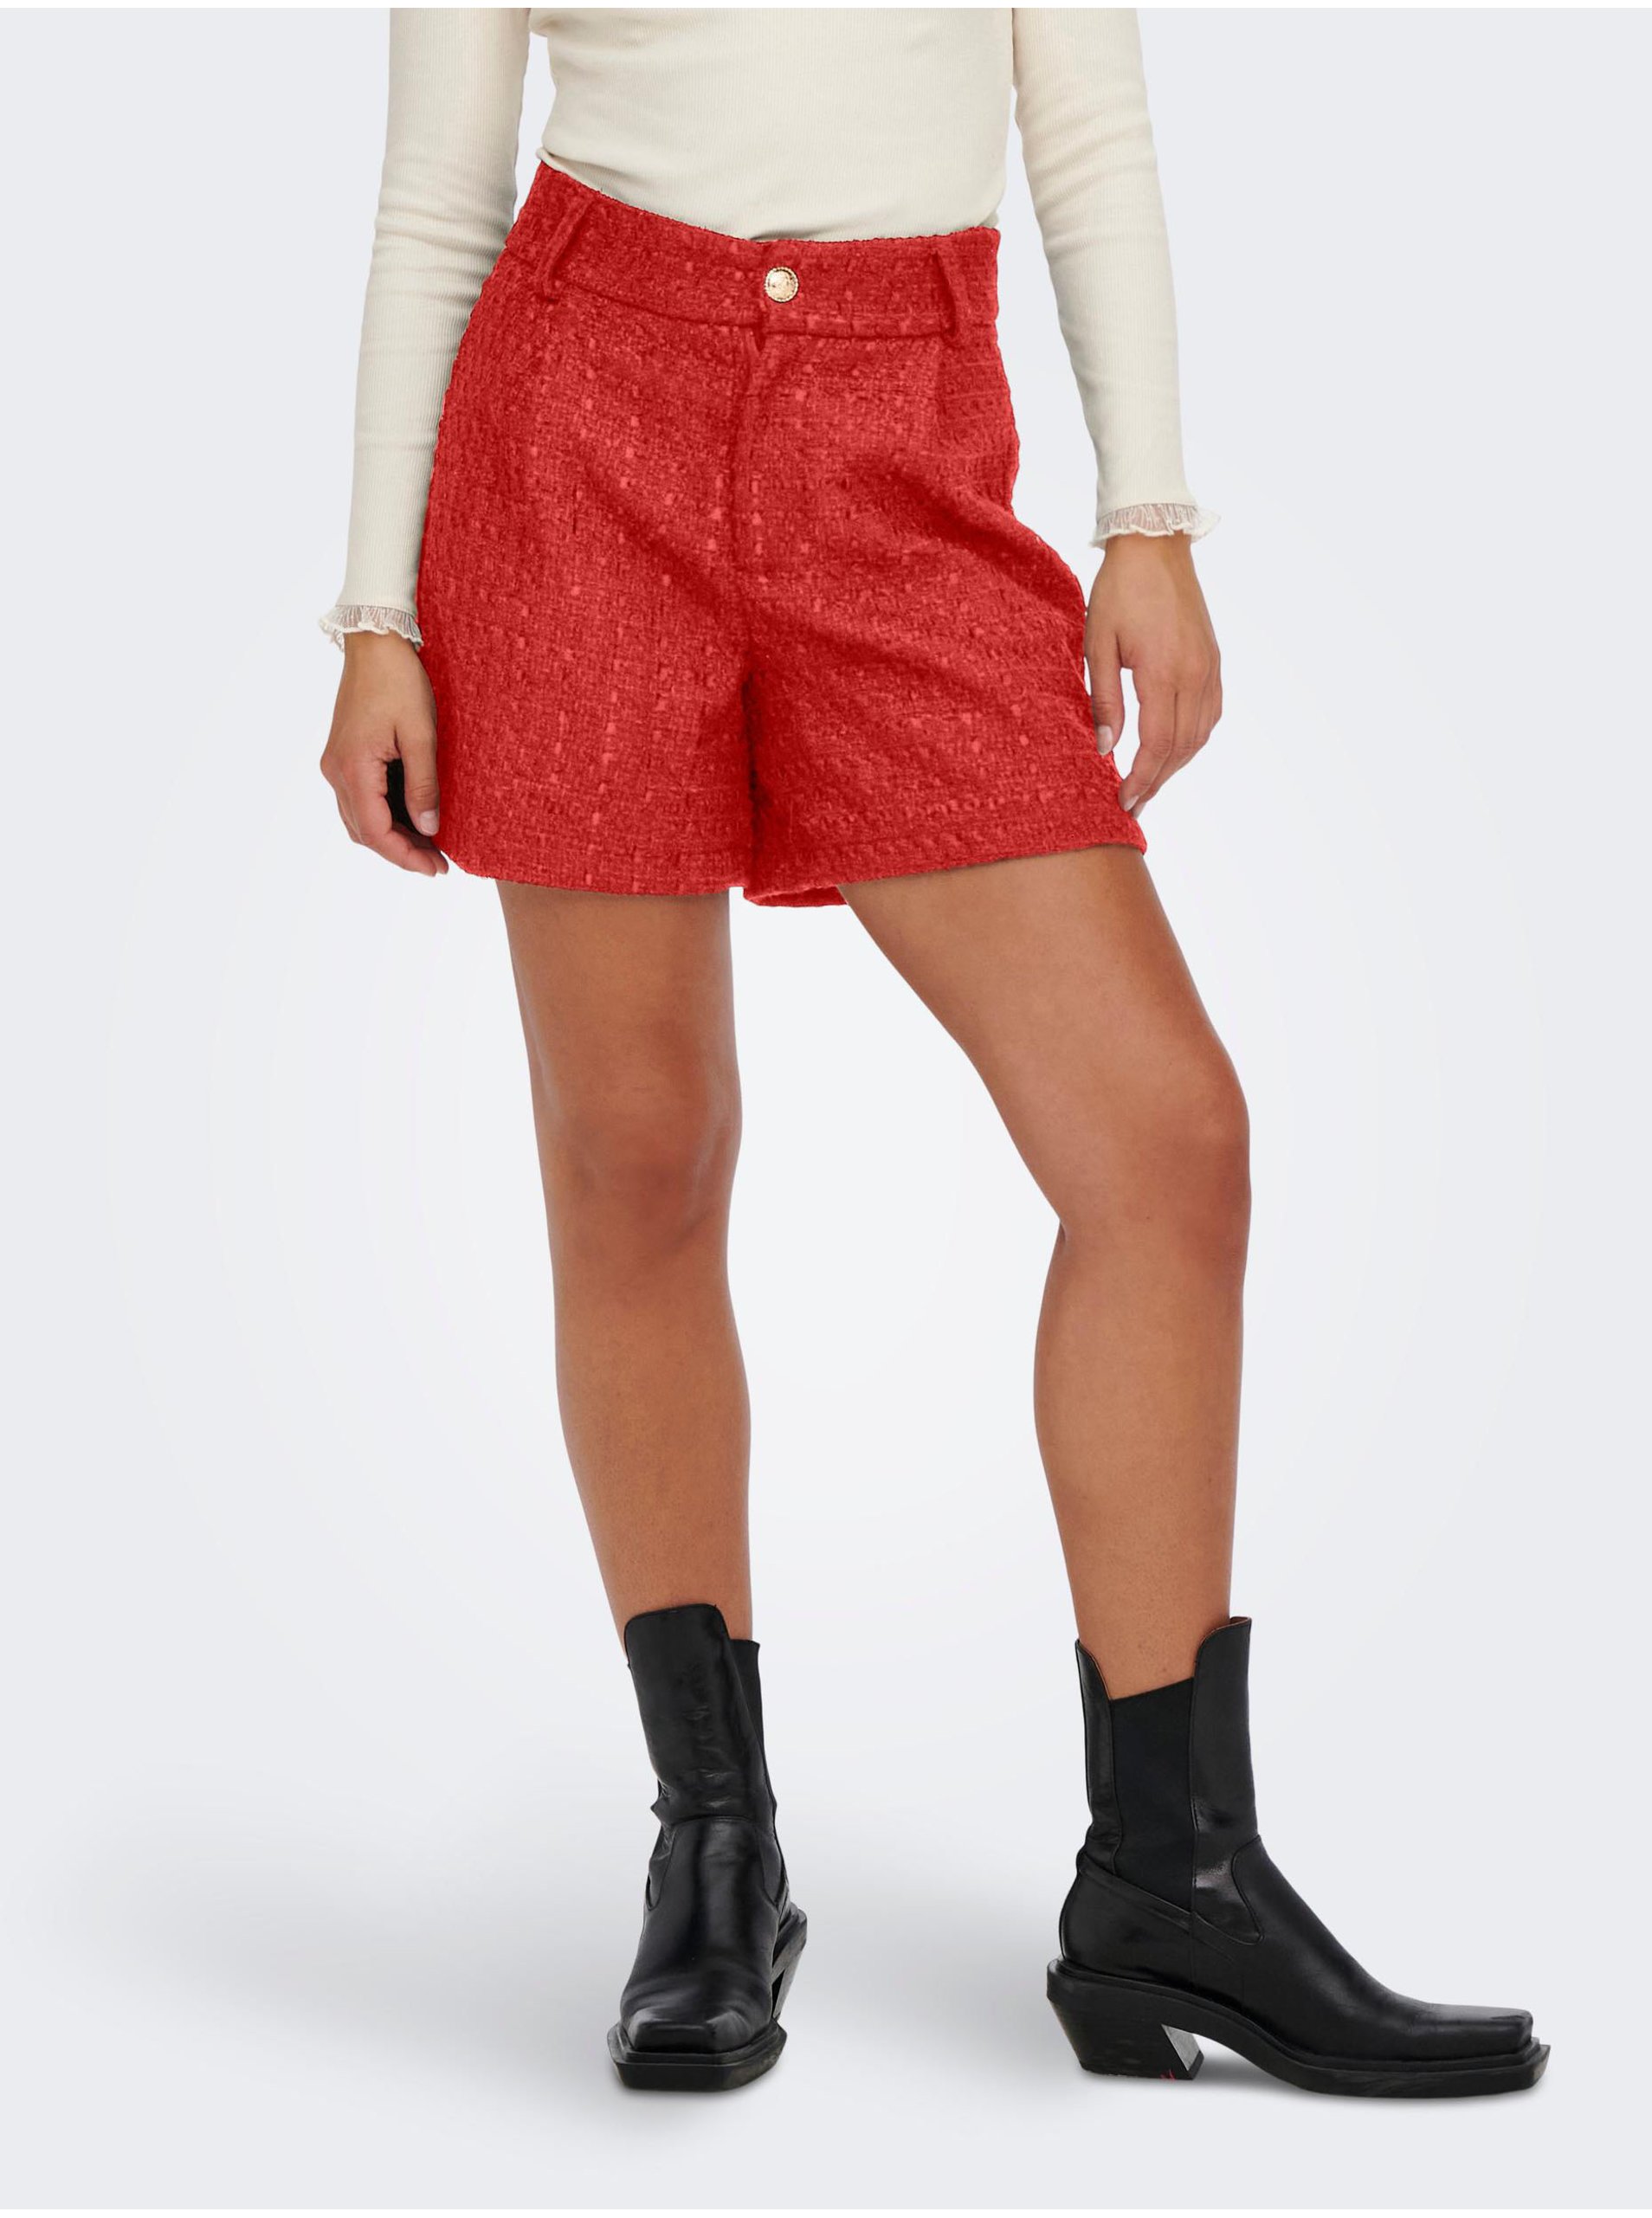 ONLY Kennedy Red Shorts - Women